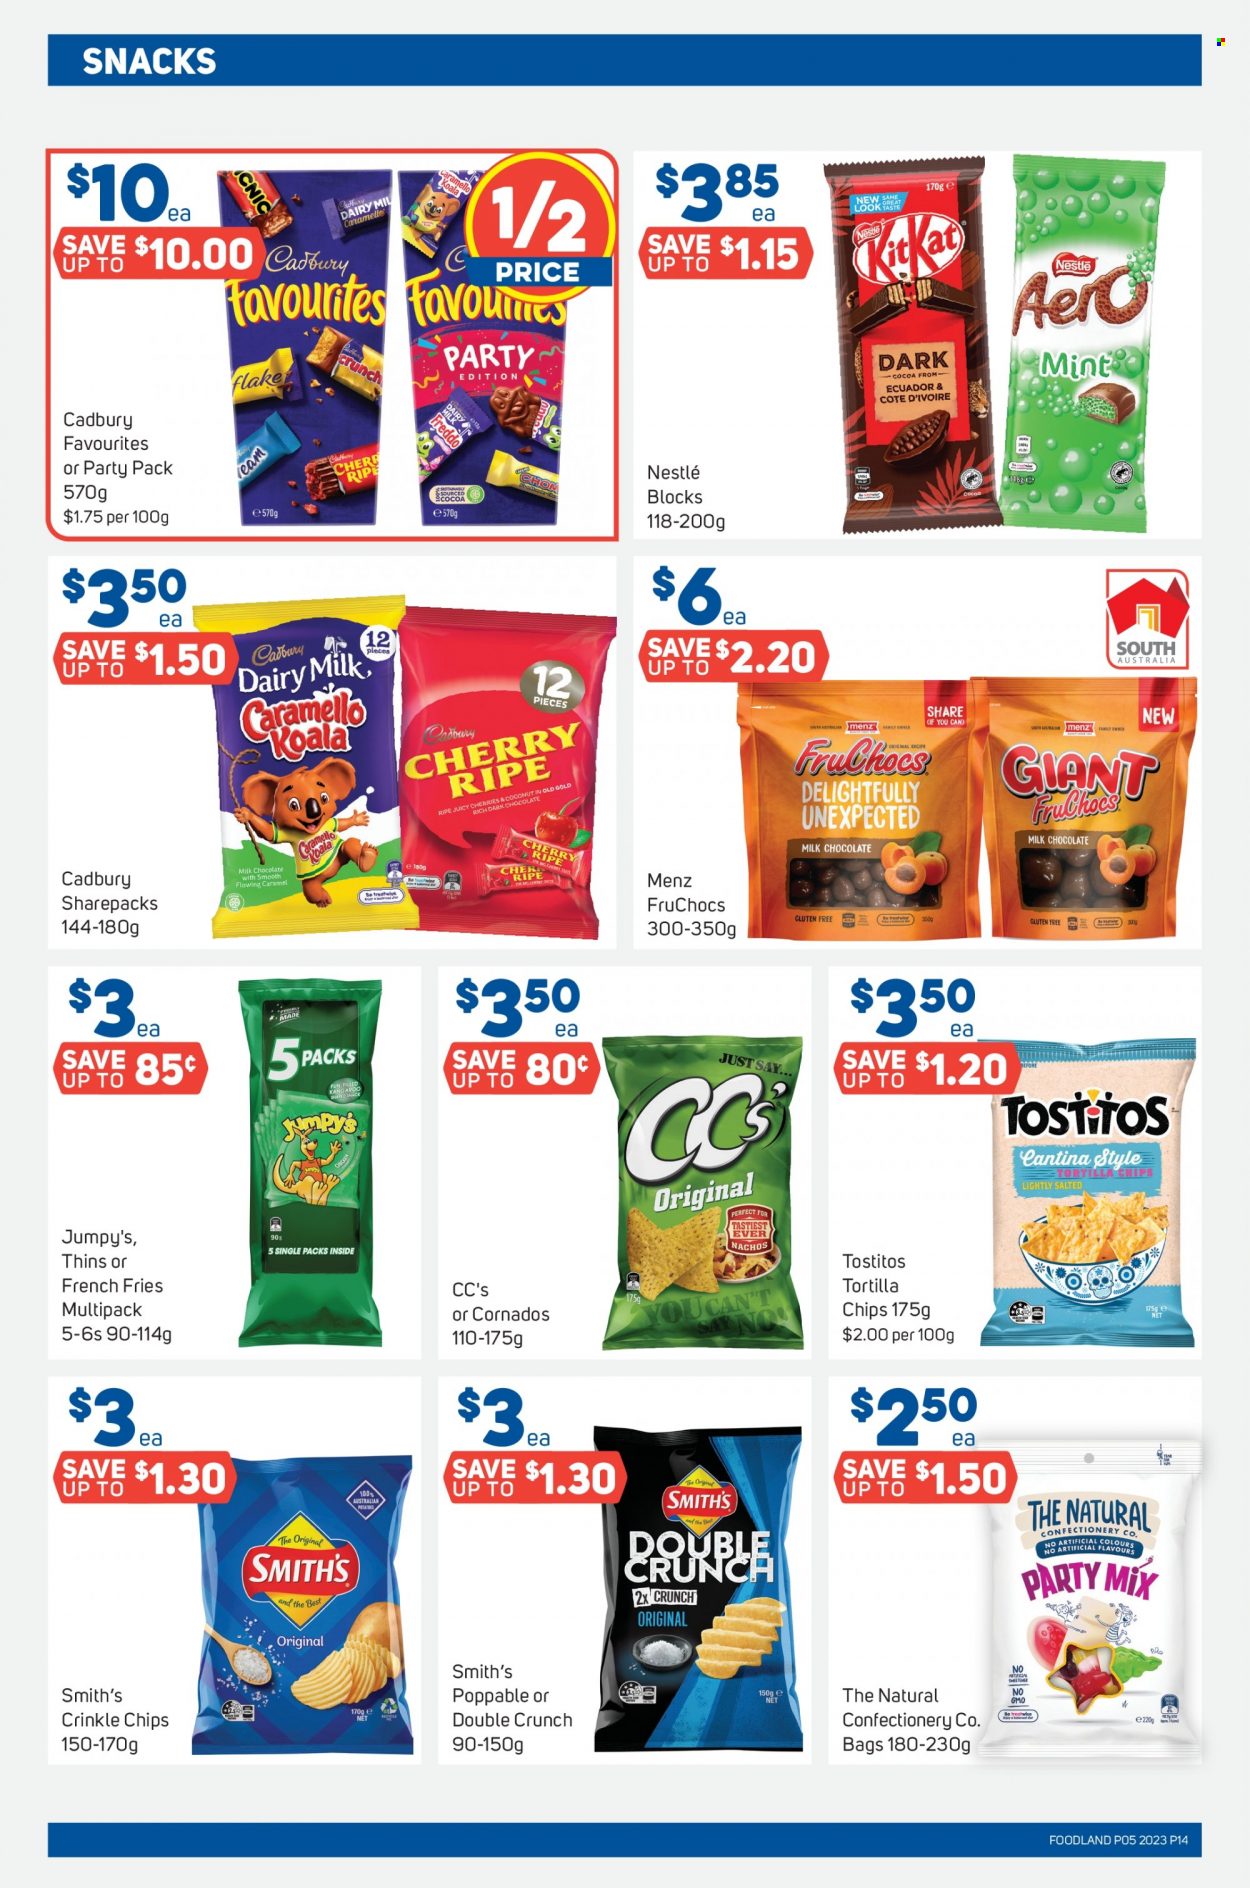 thumbnail - Foodland Catalogue - 1 Feb 2023 - 7 Feb 2023 - Sales products - potatoes, cherries, potato fries, french fries, crinkle fries, milk chocolate, Nestlé, chocolate, snack, dark chocolate, Cadbury, Dairy Milk, tortilla chips, chips, Smith's, Thins, Tostitos, caramel. Page 14.